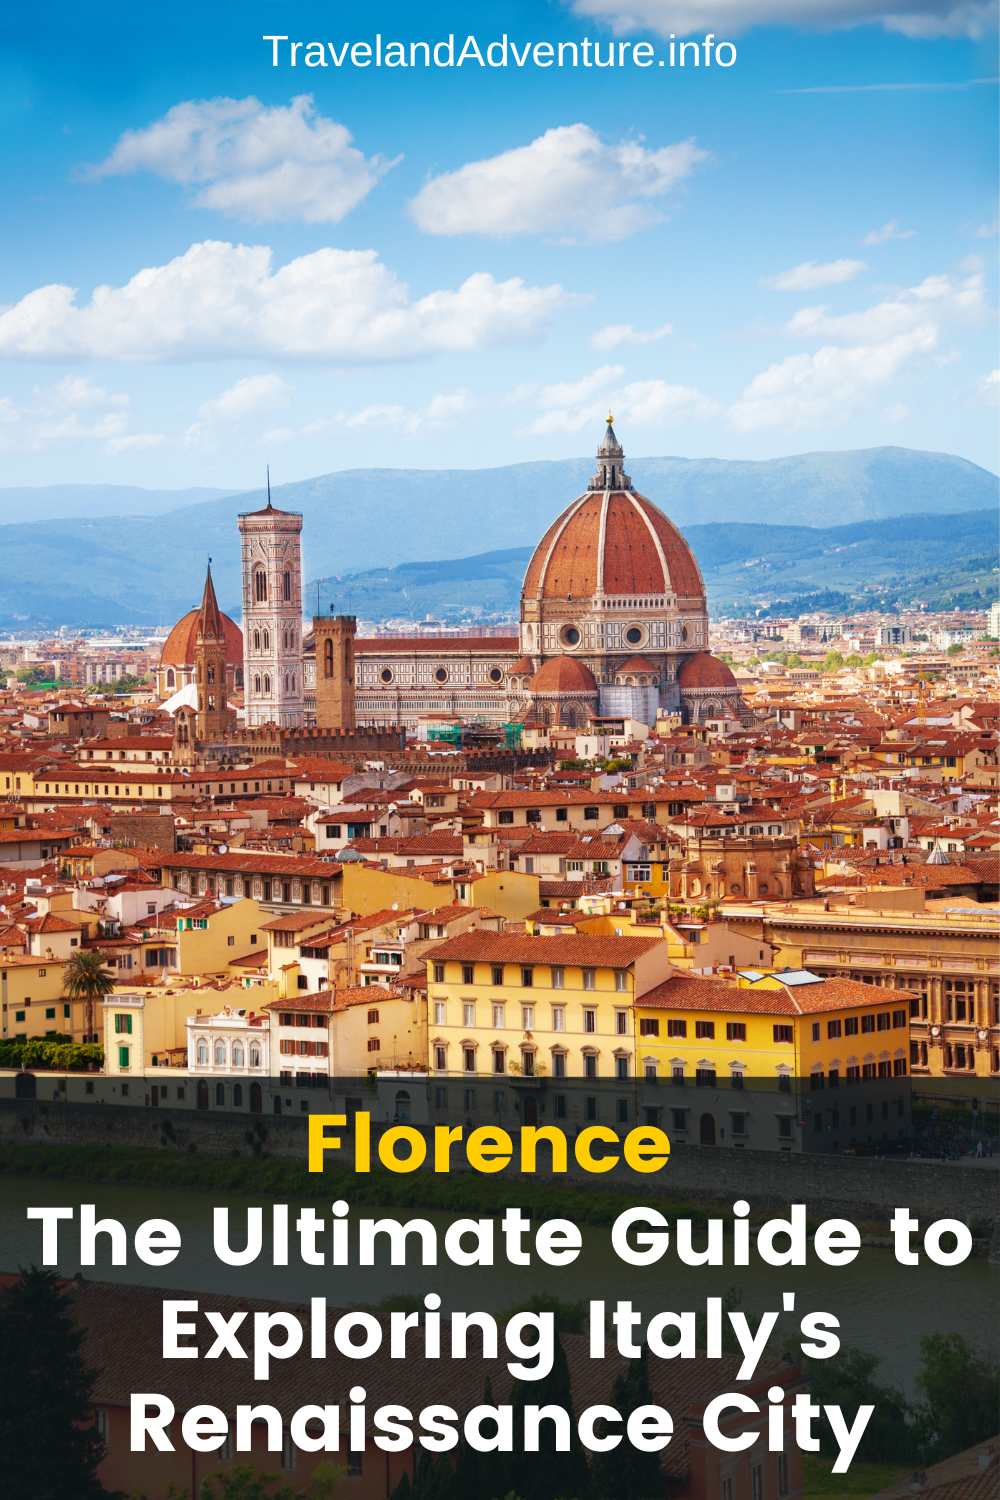 Unforgettable Florence The Ultimate Guide to Exploring Italy's Renaissance City